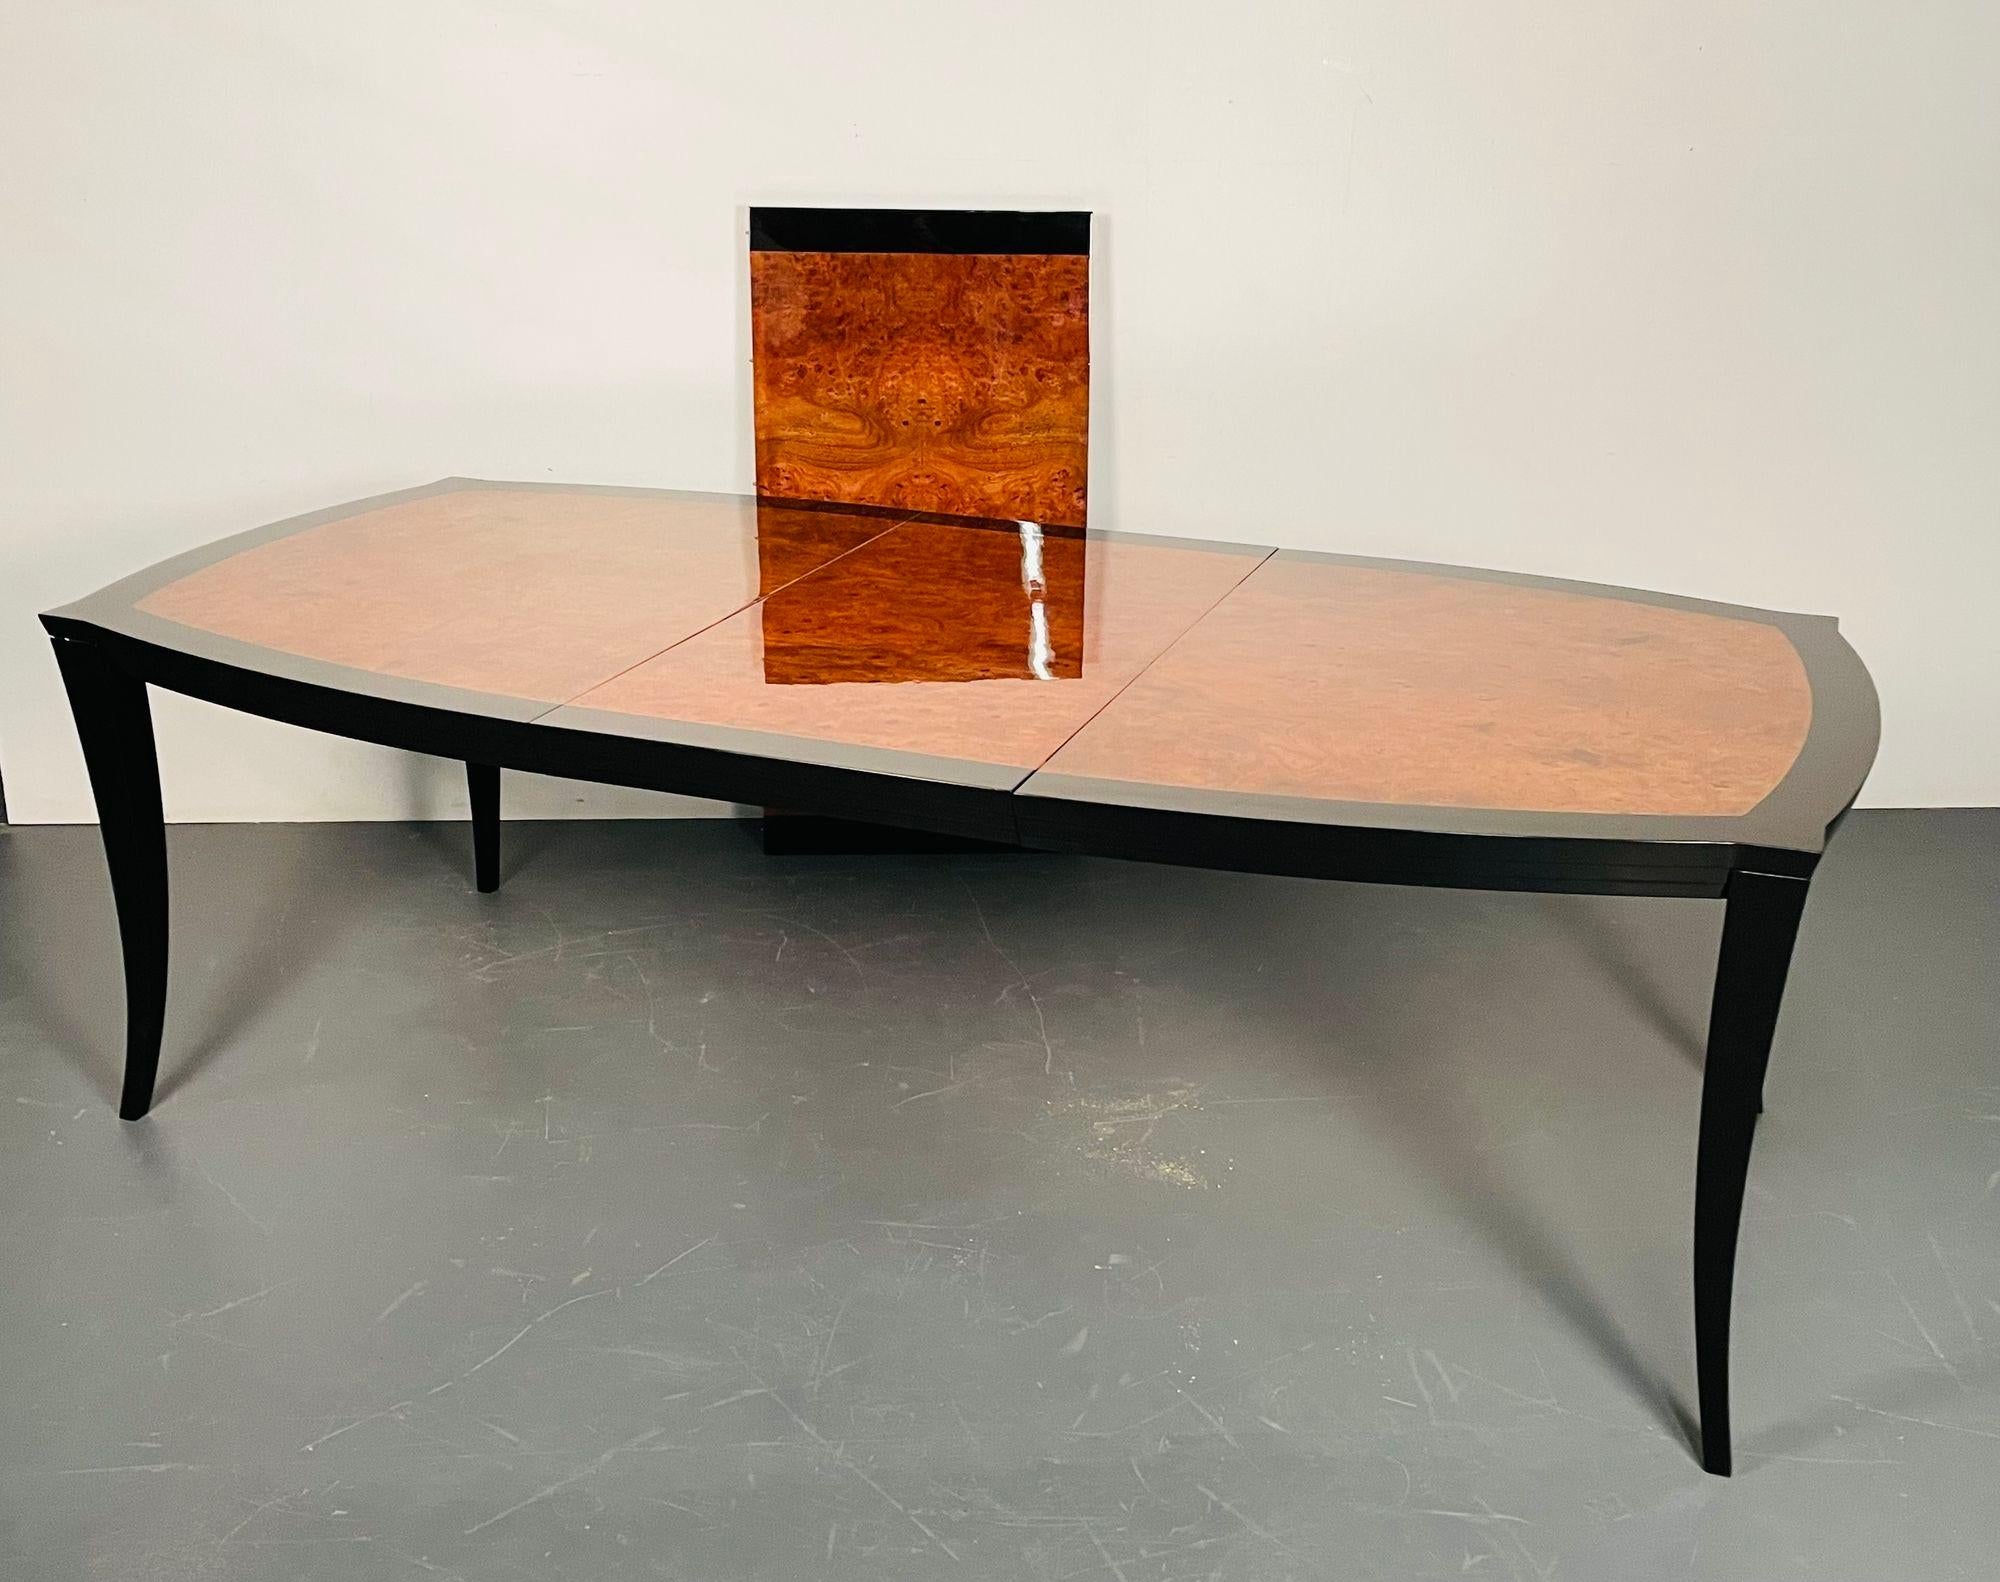 Vladimir Kagan (American, 1927-2016) Eva Dining Room Table, Vladimir Kagan Designs, Inc., USA, circa 1983. Labeled, Fully Refinished
Investment grade Important Designer Dining Set - This listing is ONLY for the 'Eva' dining table. The entire set is